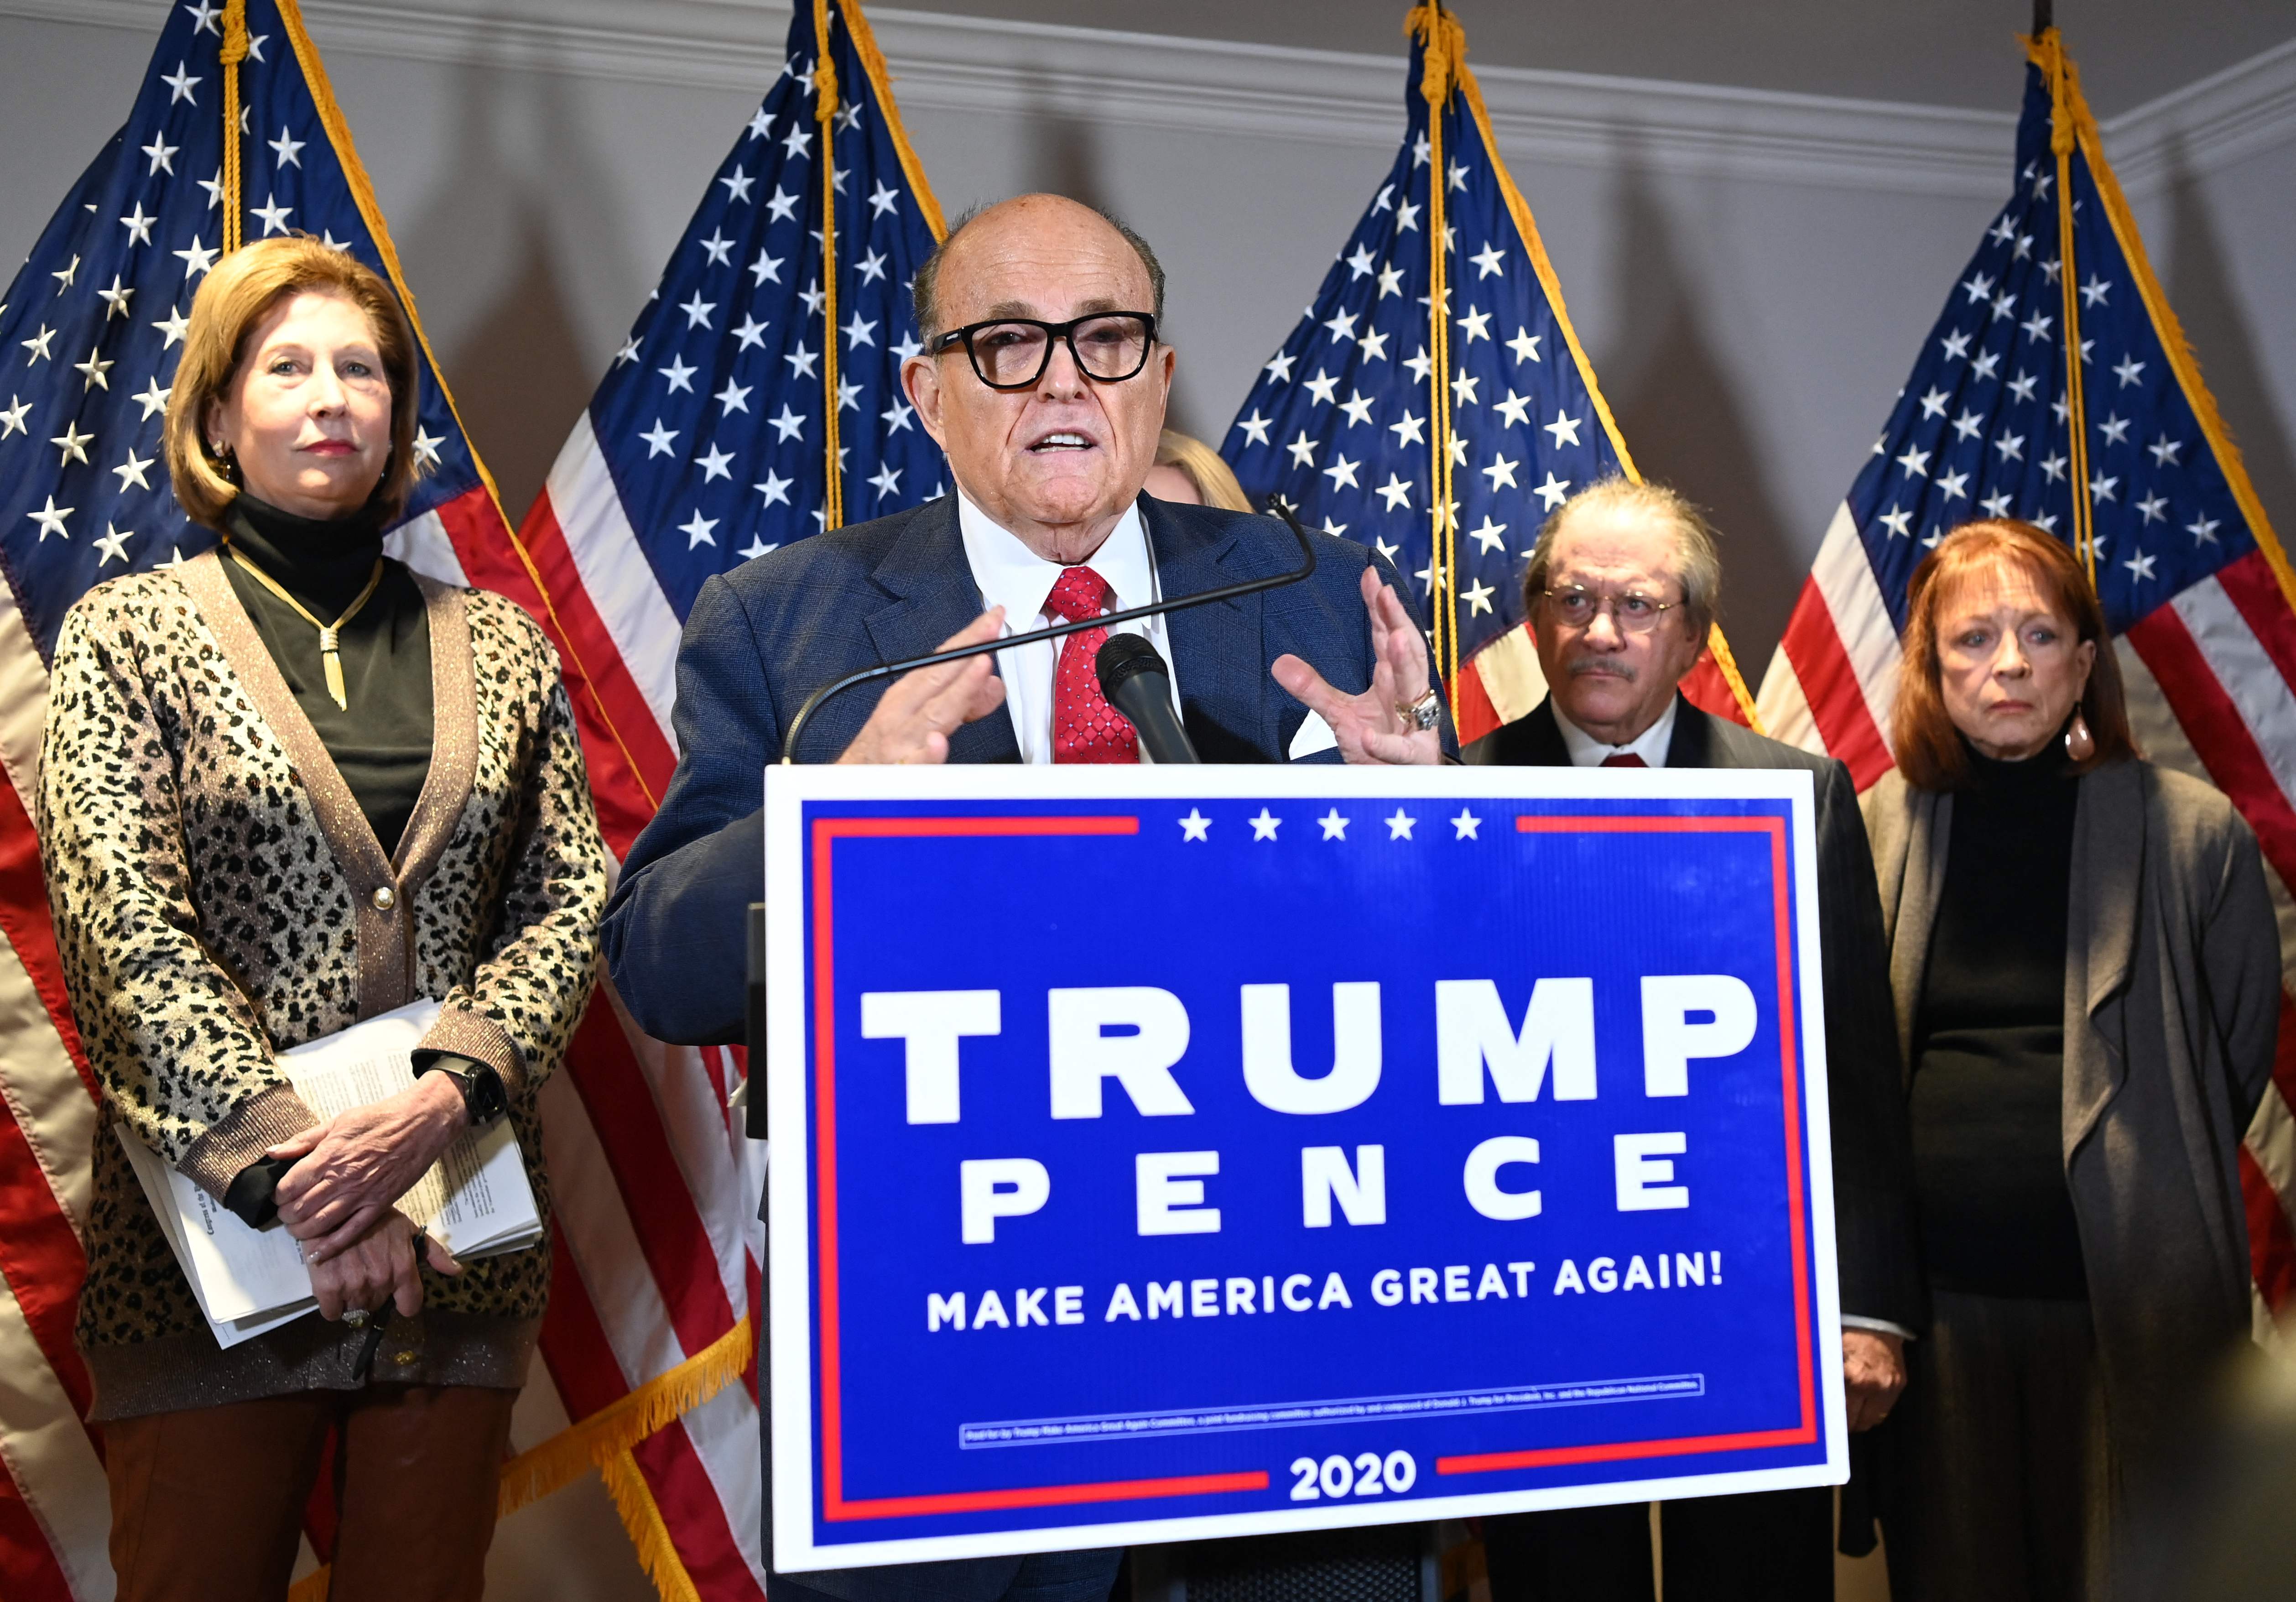 Rudy Giuliani and members of a legal team that led a dubious, failed effort to challenge election results in state that Donald Trump lost held an infamous press conference on 19 November, 2020.